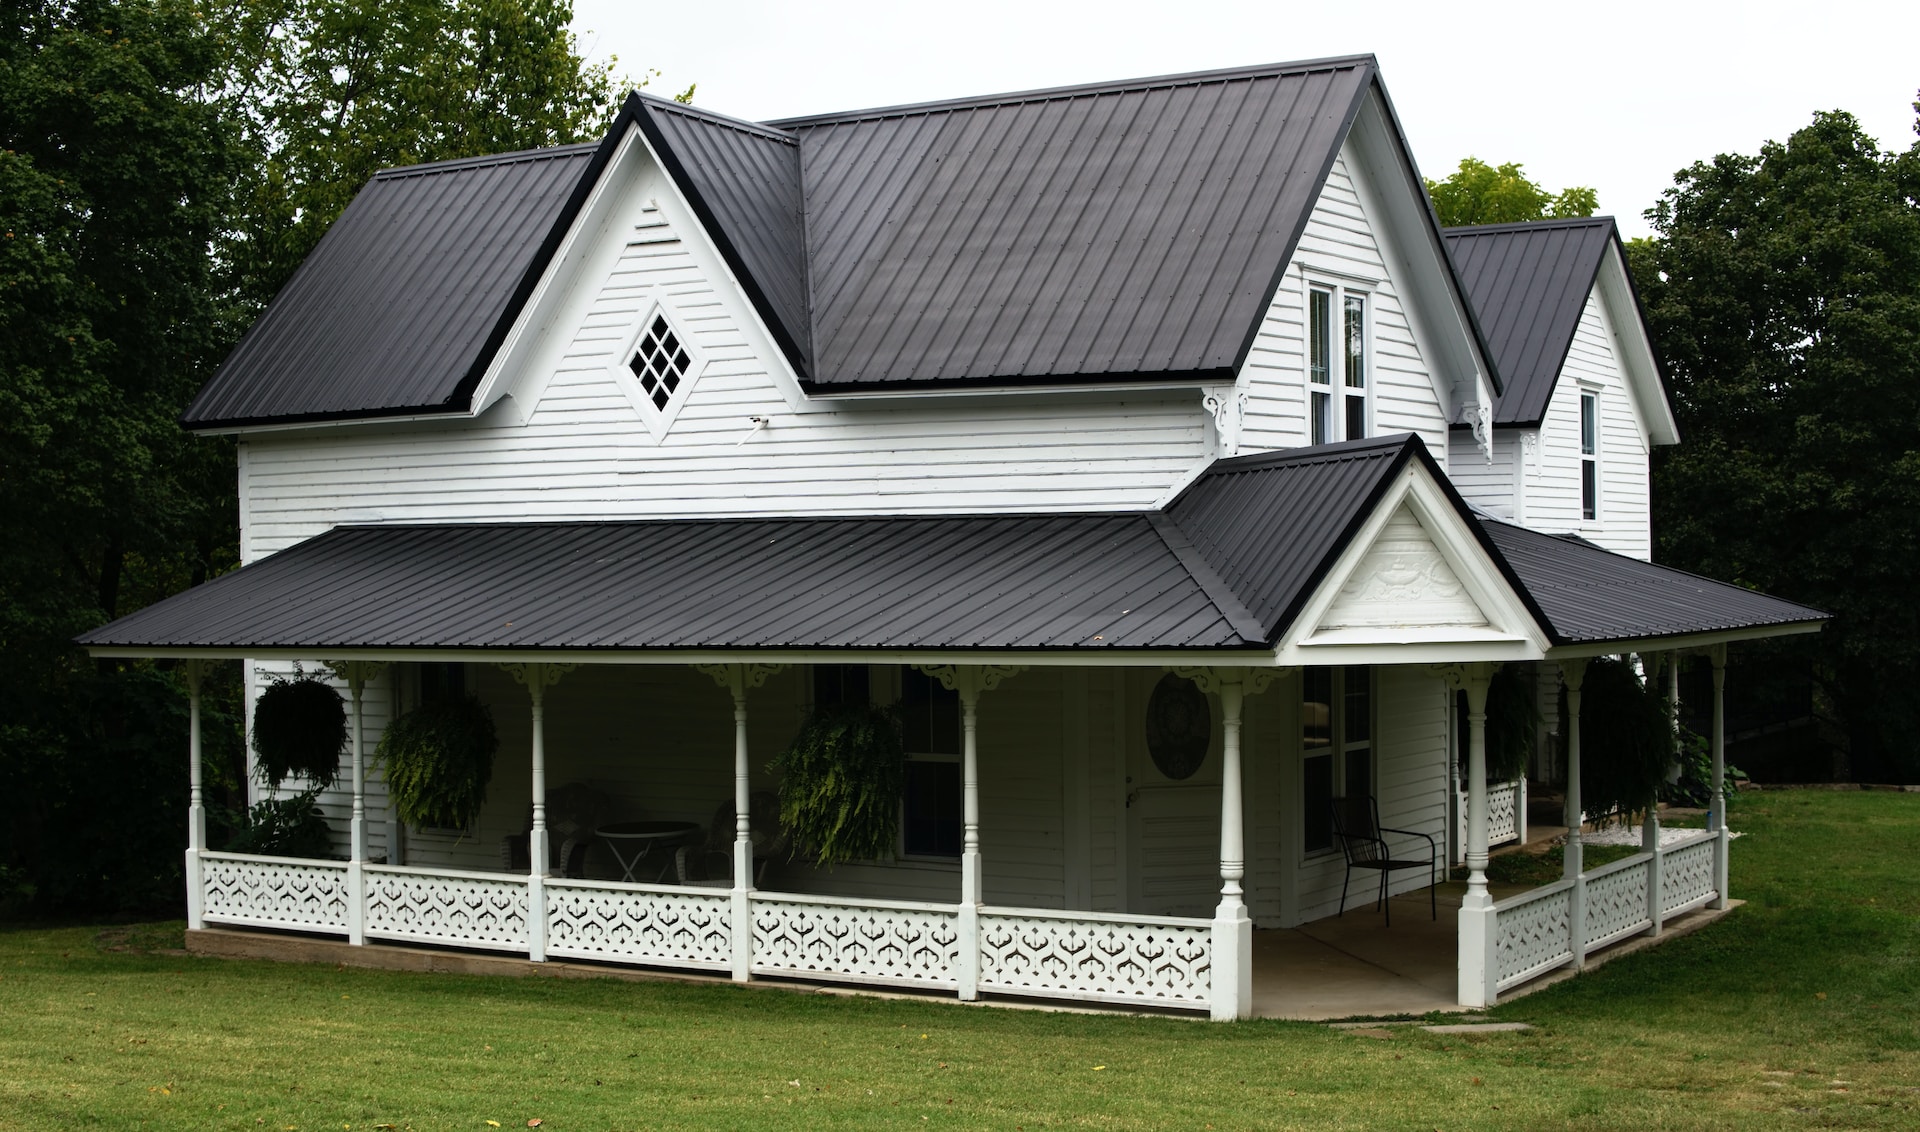 White house with wrap around porch and black metal roofing